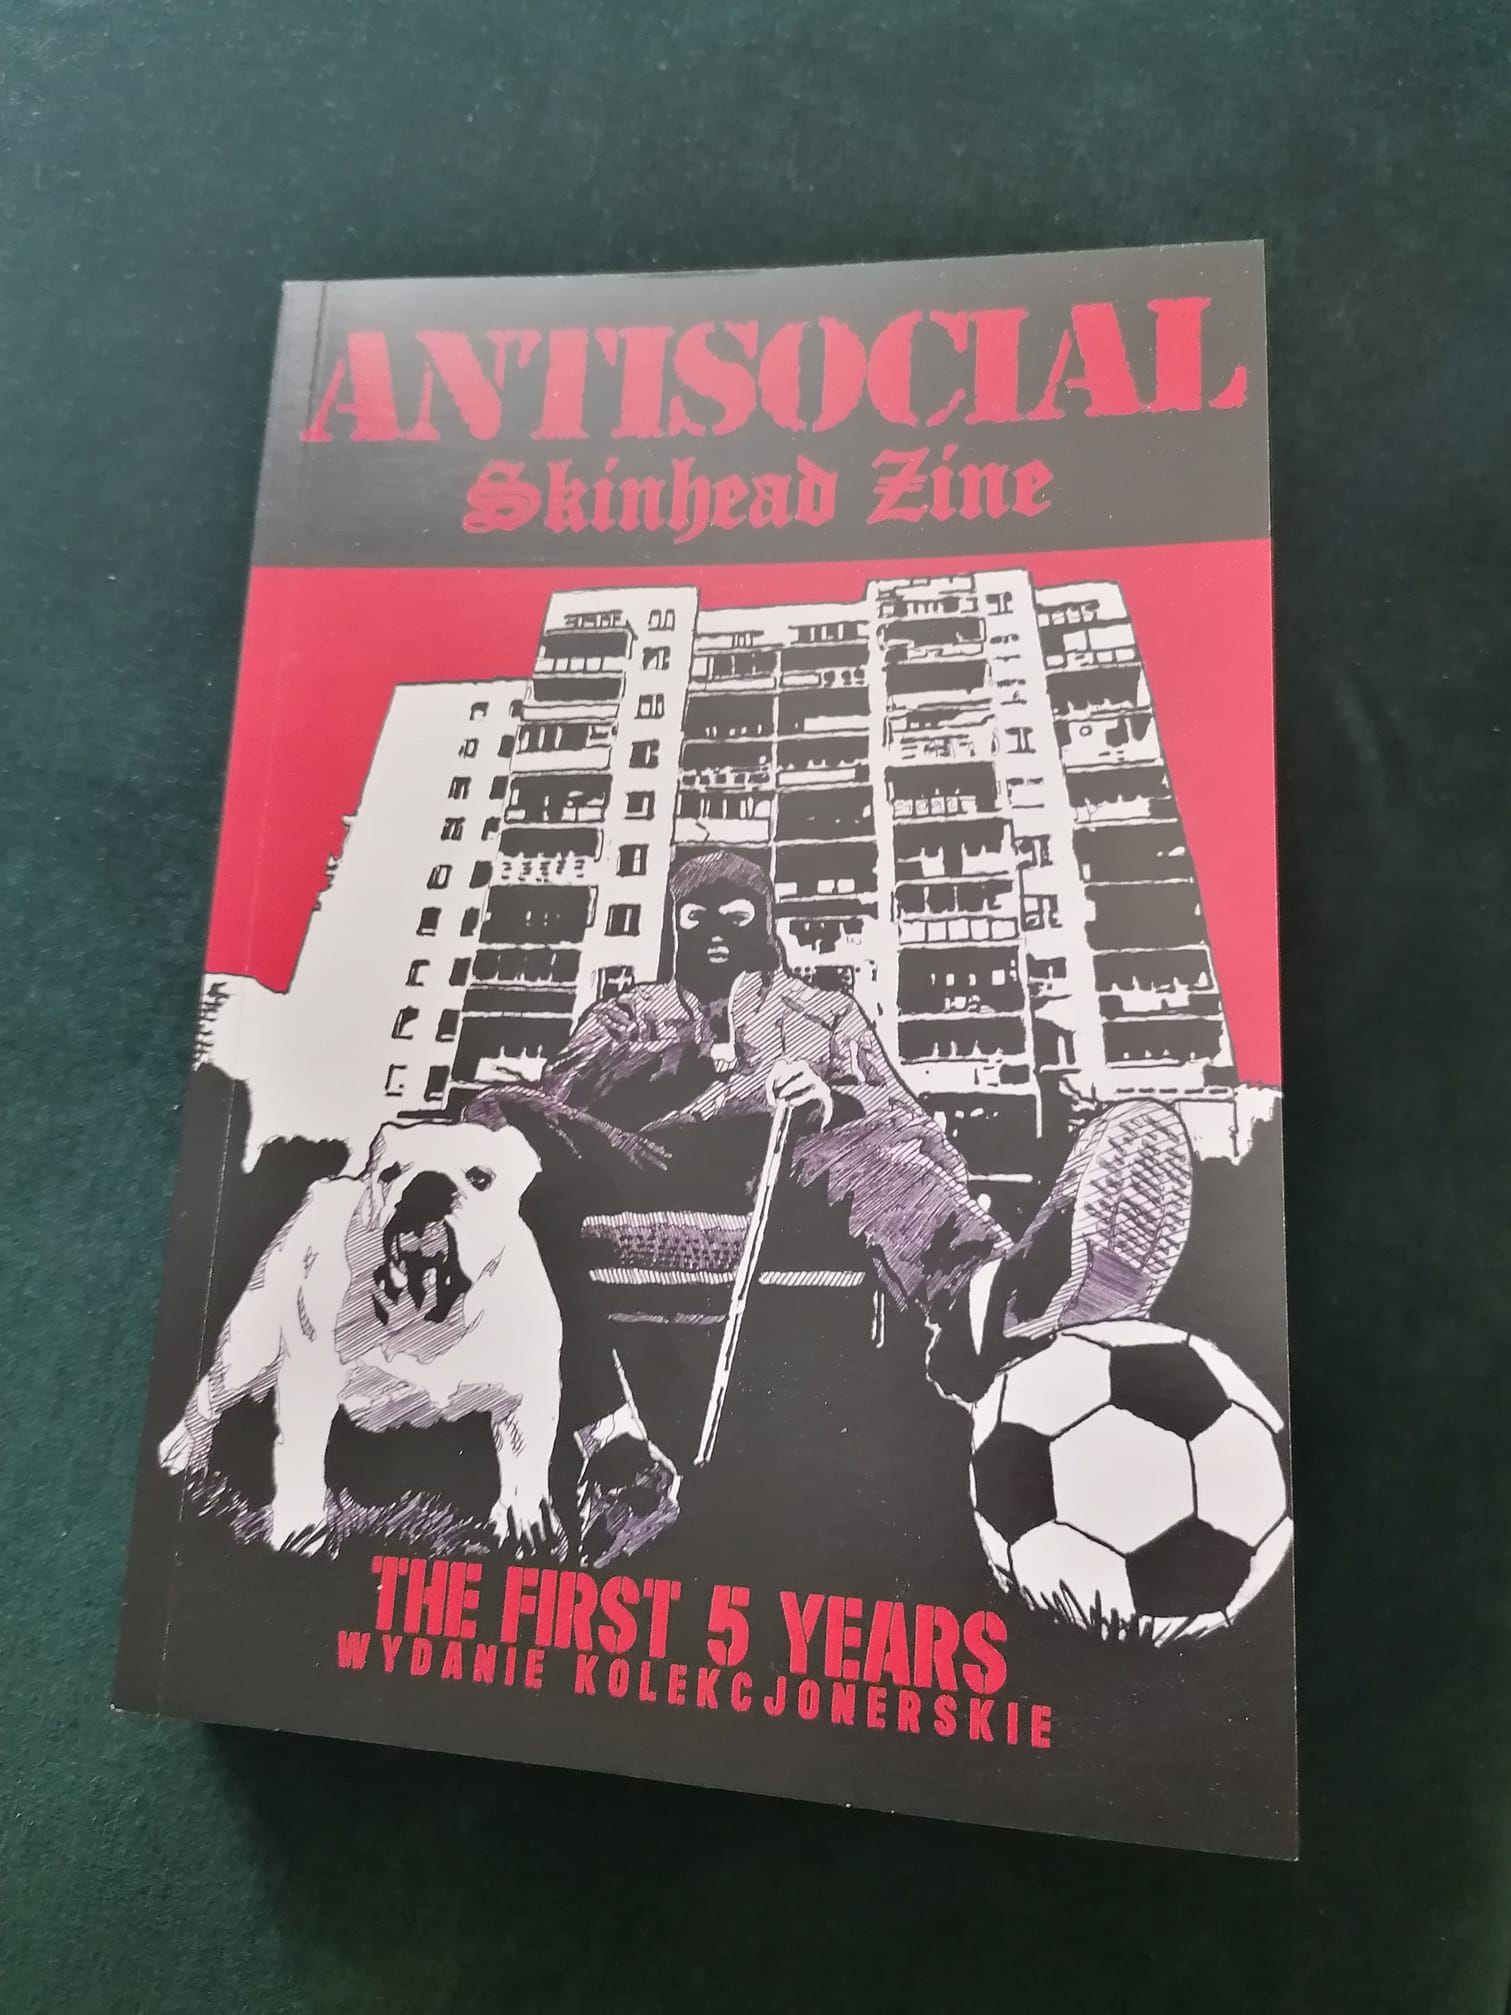 Antisocial Skinhead Zine The First 5 Years